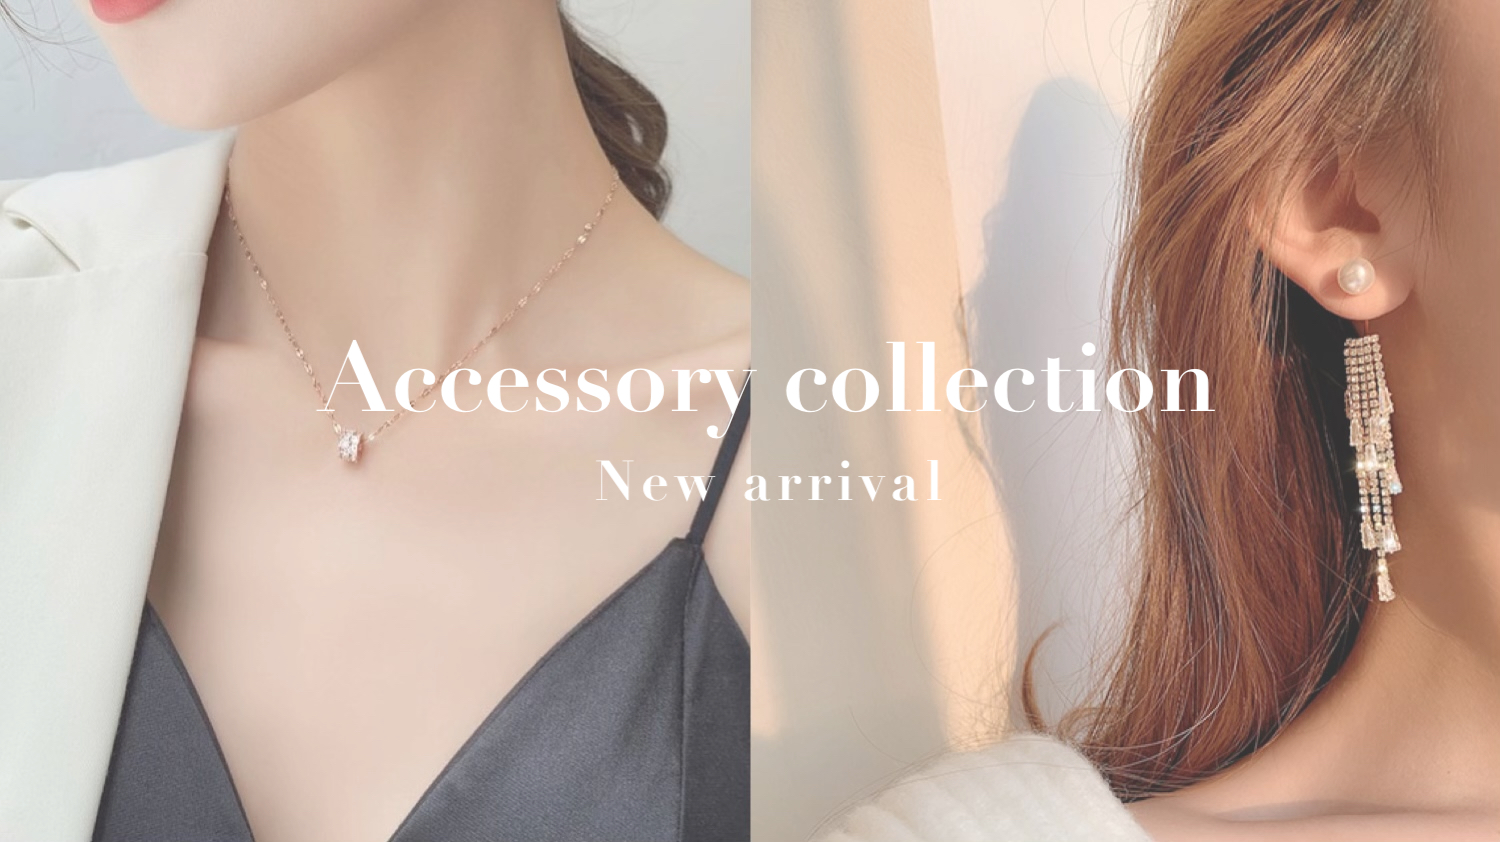 〔Accessory collection〕新作アクセサリー紹介